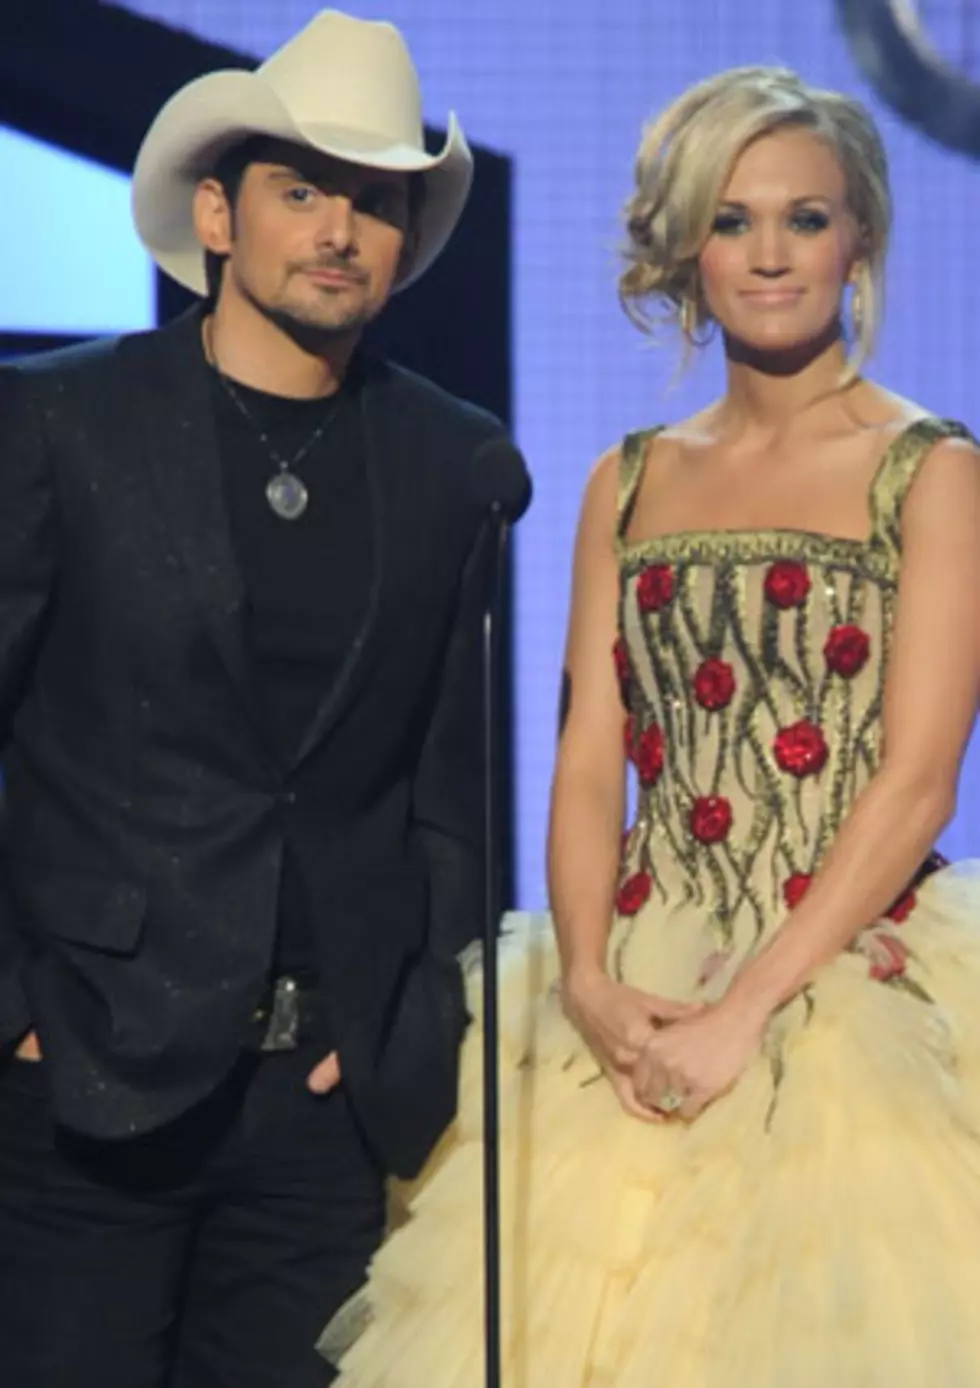 Carrie Underwood and Brad Paisley Duet &#8216;Remind Me&#8217; Confirmed